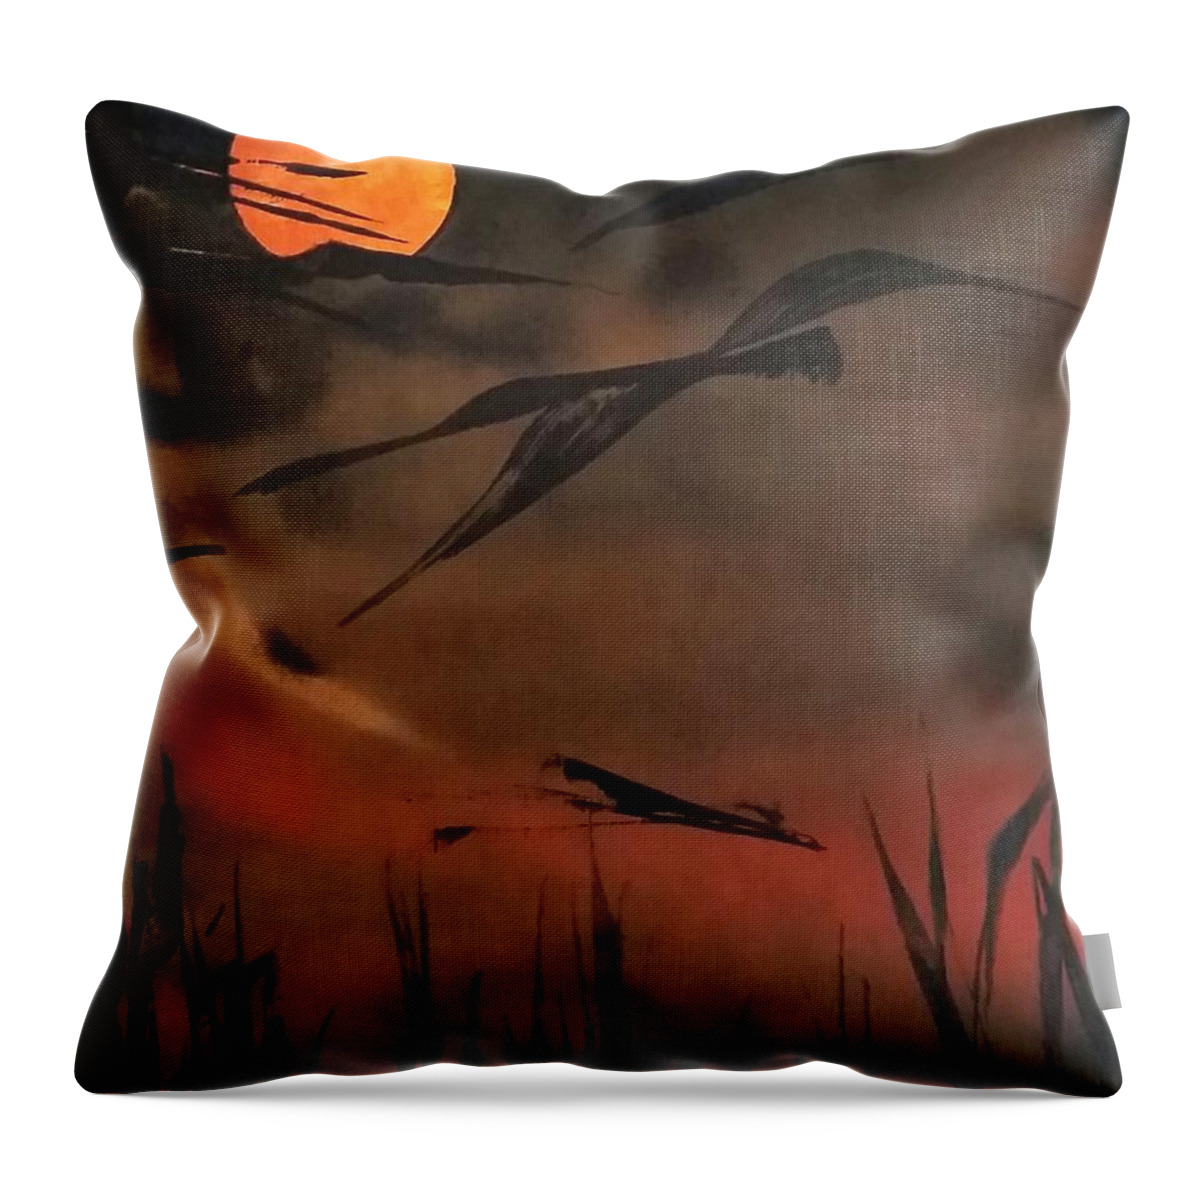 Marsh Throw Pillow featuring the painting Marsh Birds by Gerry Smith